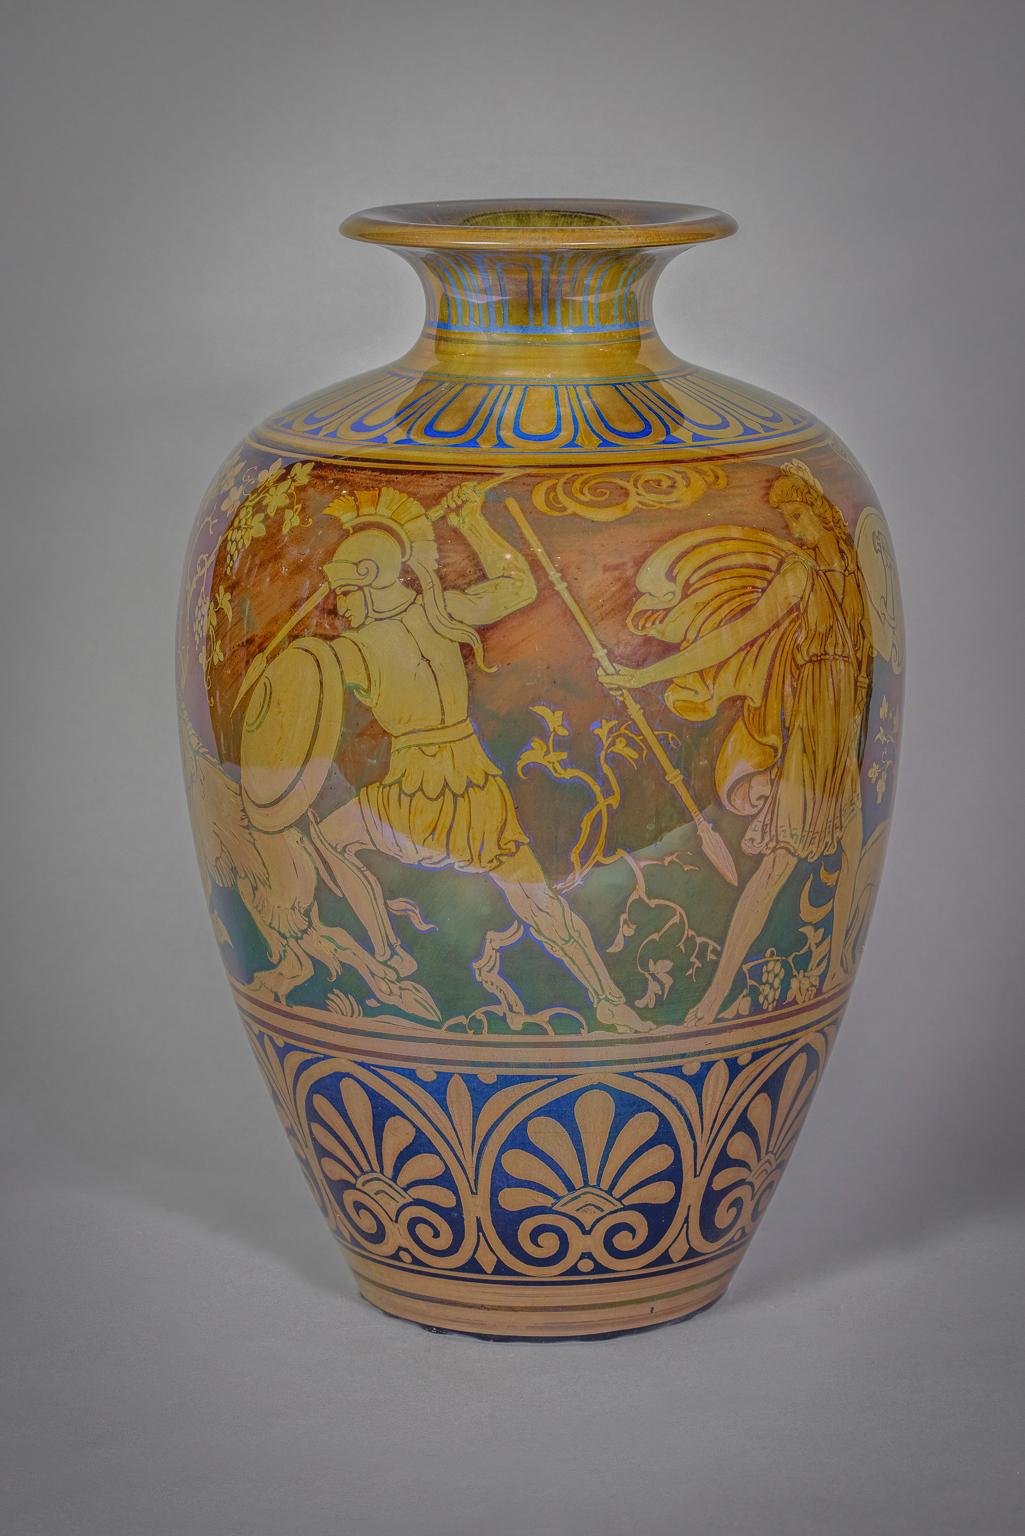 shouldered form with flaring neck, painted with a frieze of classical Greek warriors spearing a wild boar, between stylized foliage, in golden lustre on a blue and red ground, painted artist cipher of Richard Joyce and date.